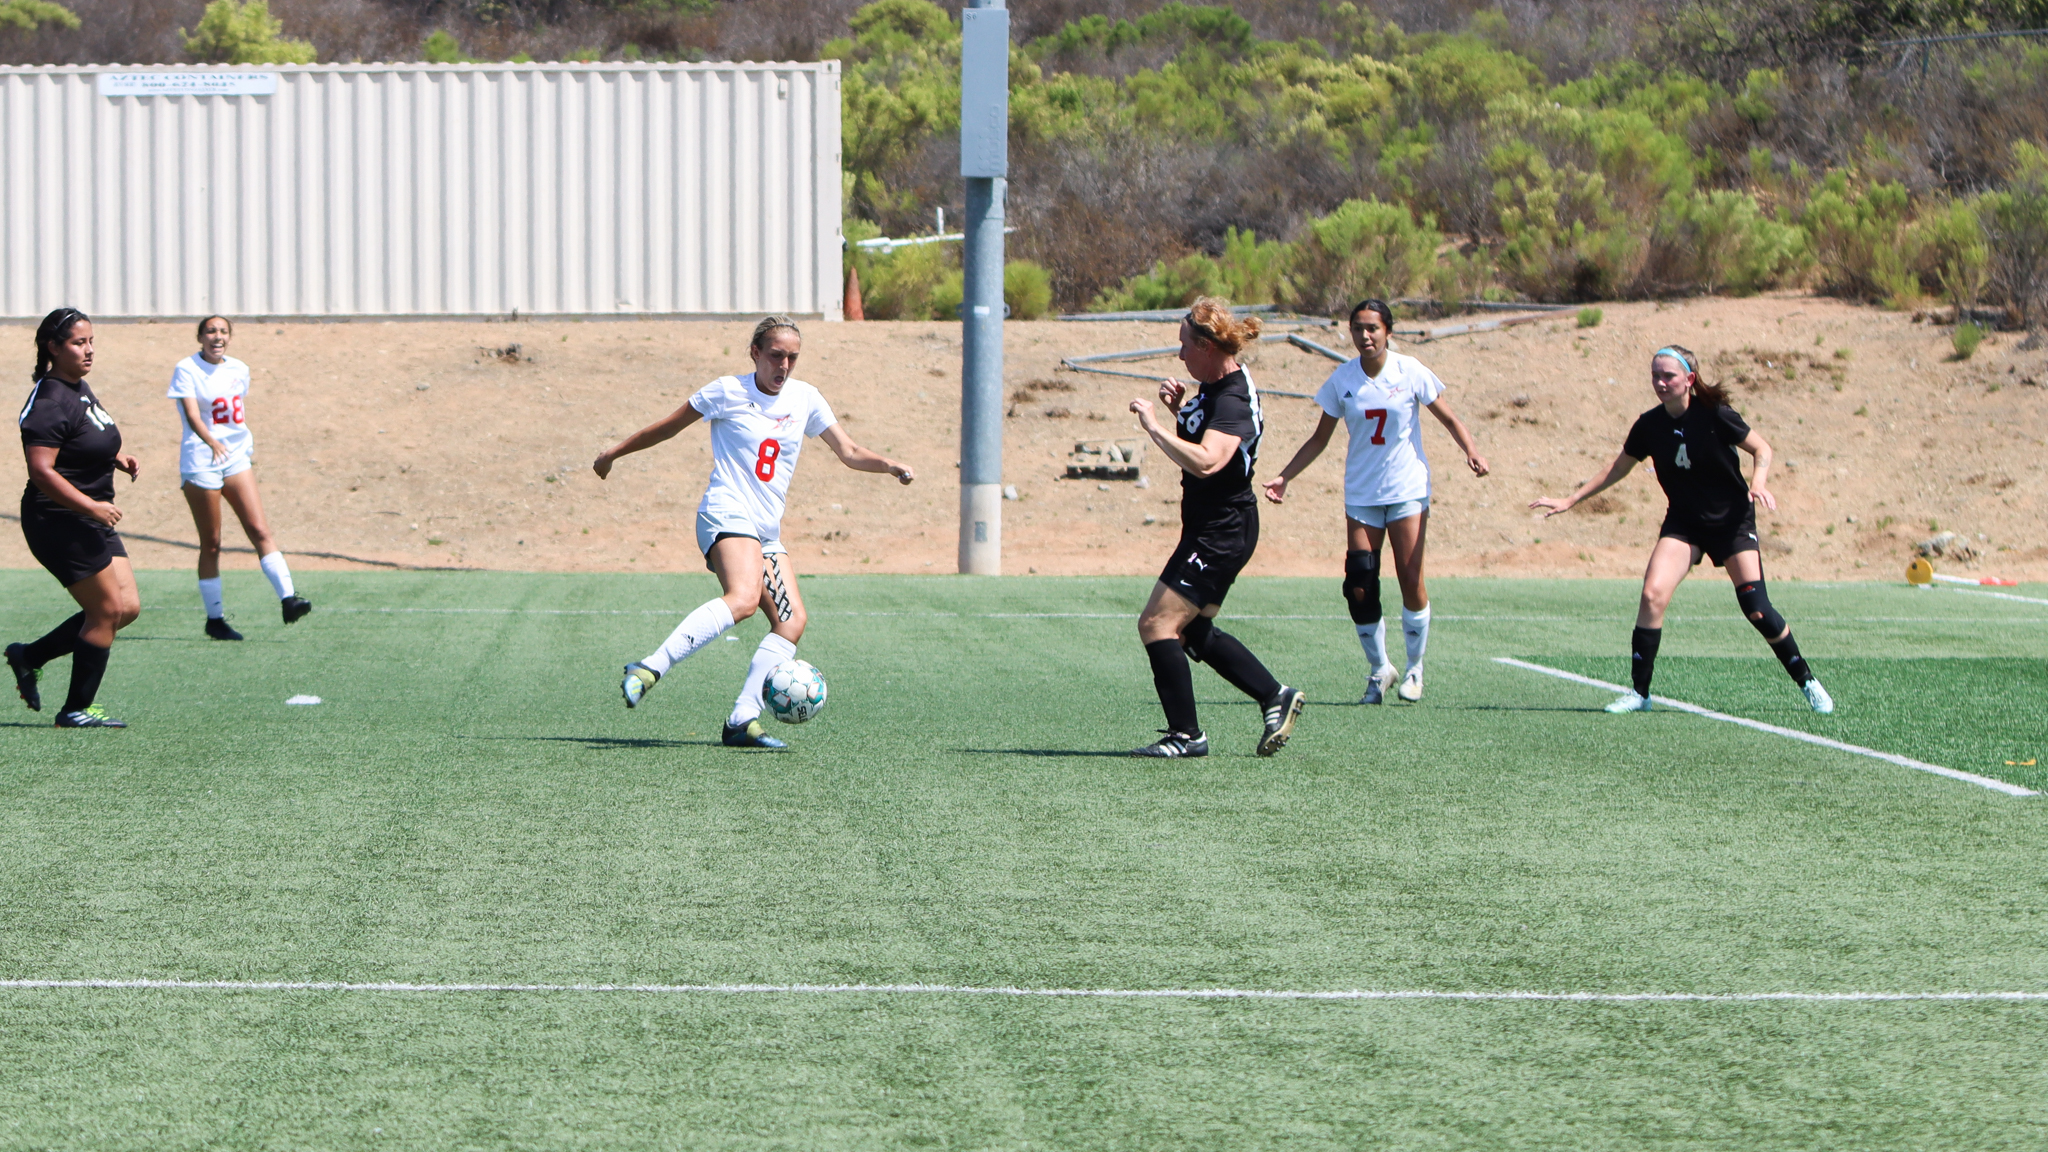 Michelle Skupnjak had her first career hat trick on Tuesday against Miramar College. Photo by Cara Heise.